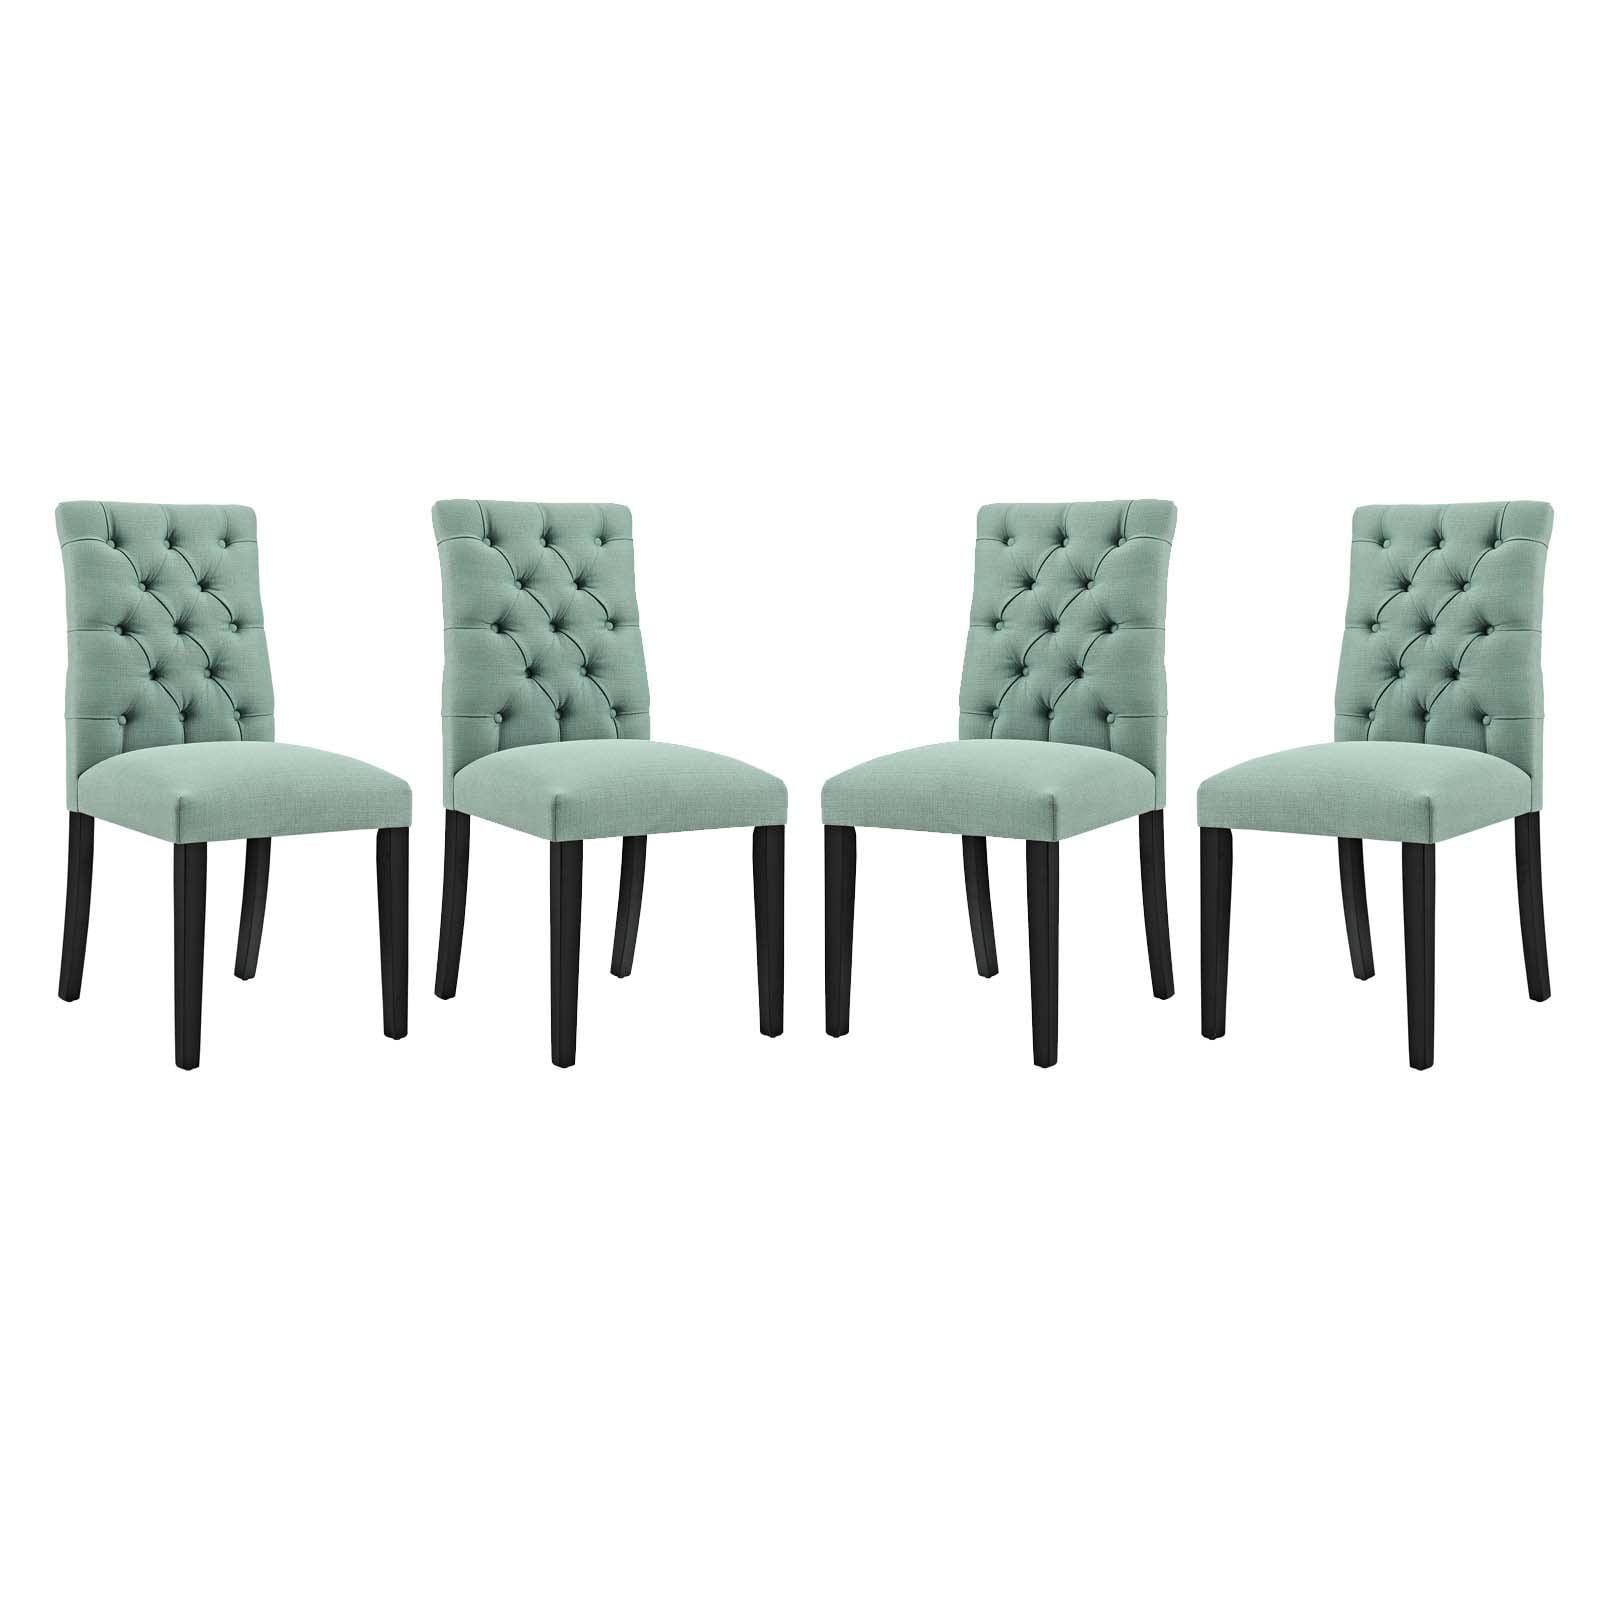 Laguna Elegance Curvy Form Upholstered Dining Chair with Wood Legs